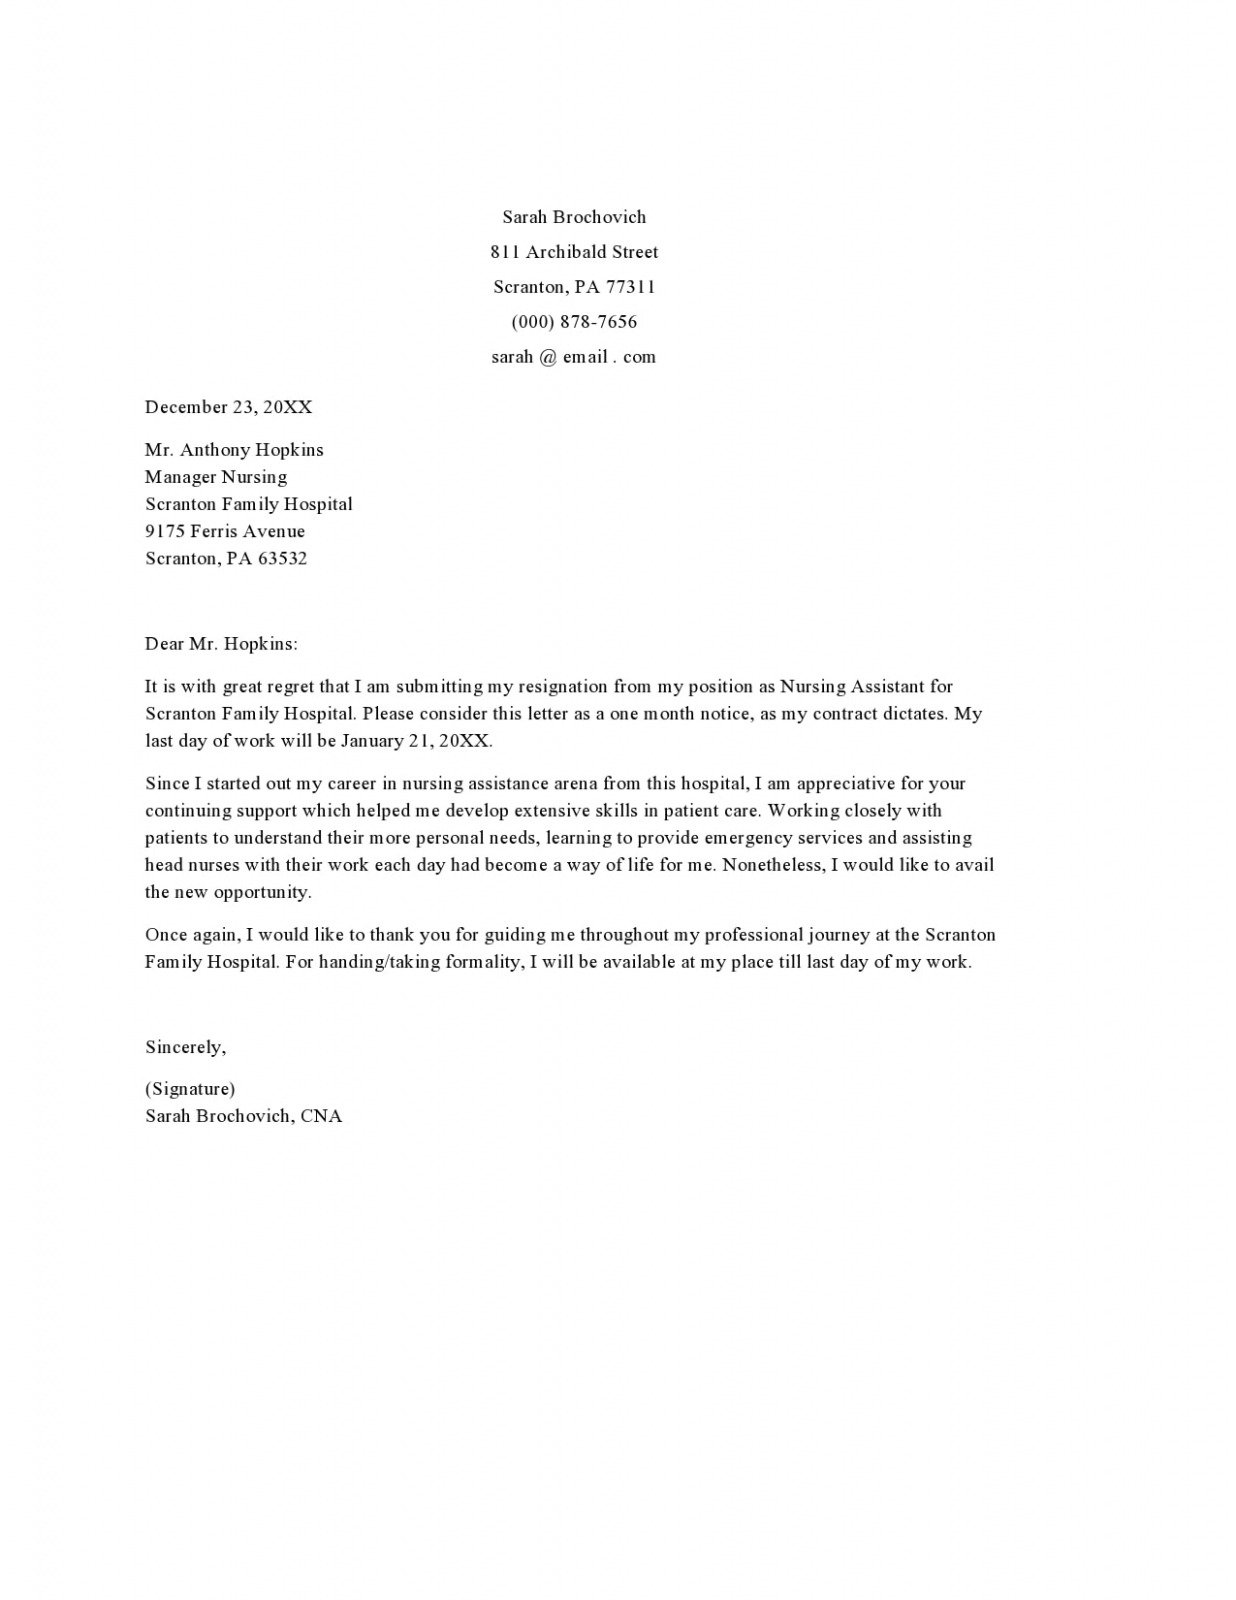  Nurse Resignation Letter Due To New Job Opportunity PPT